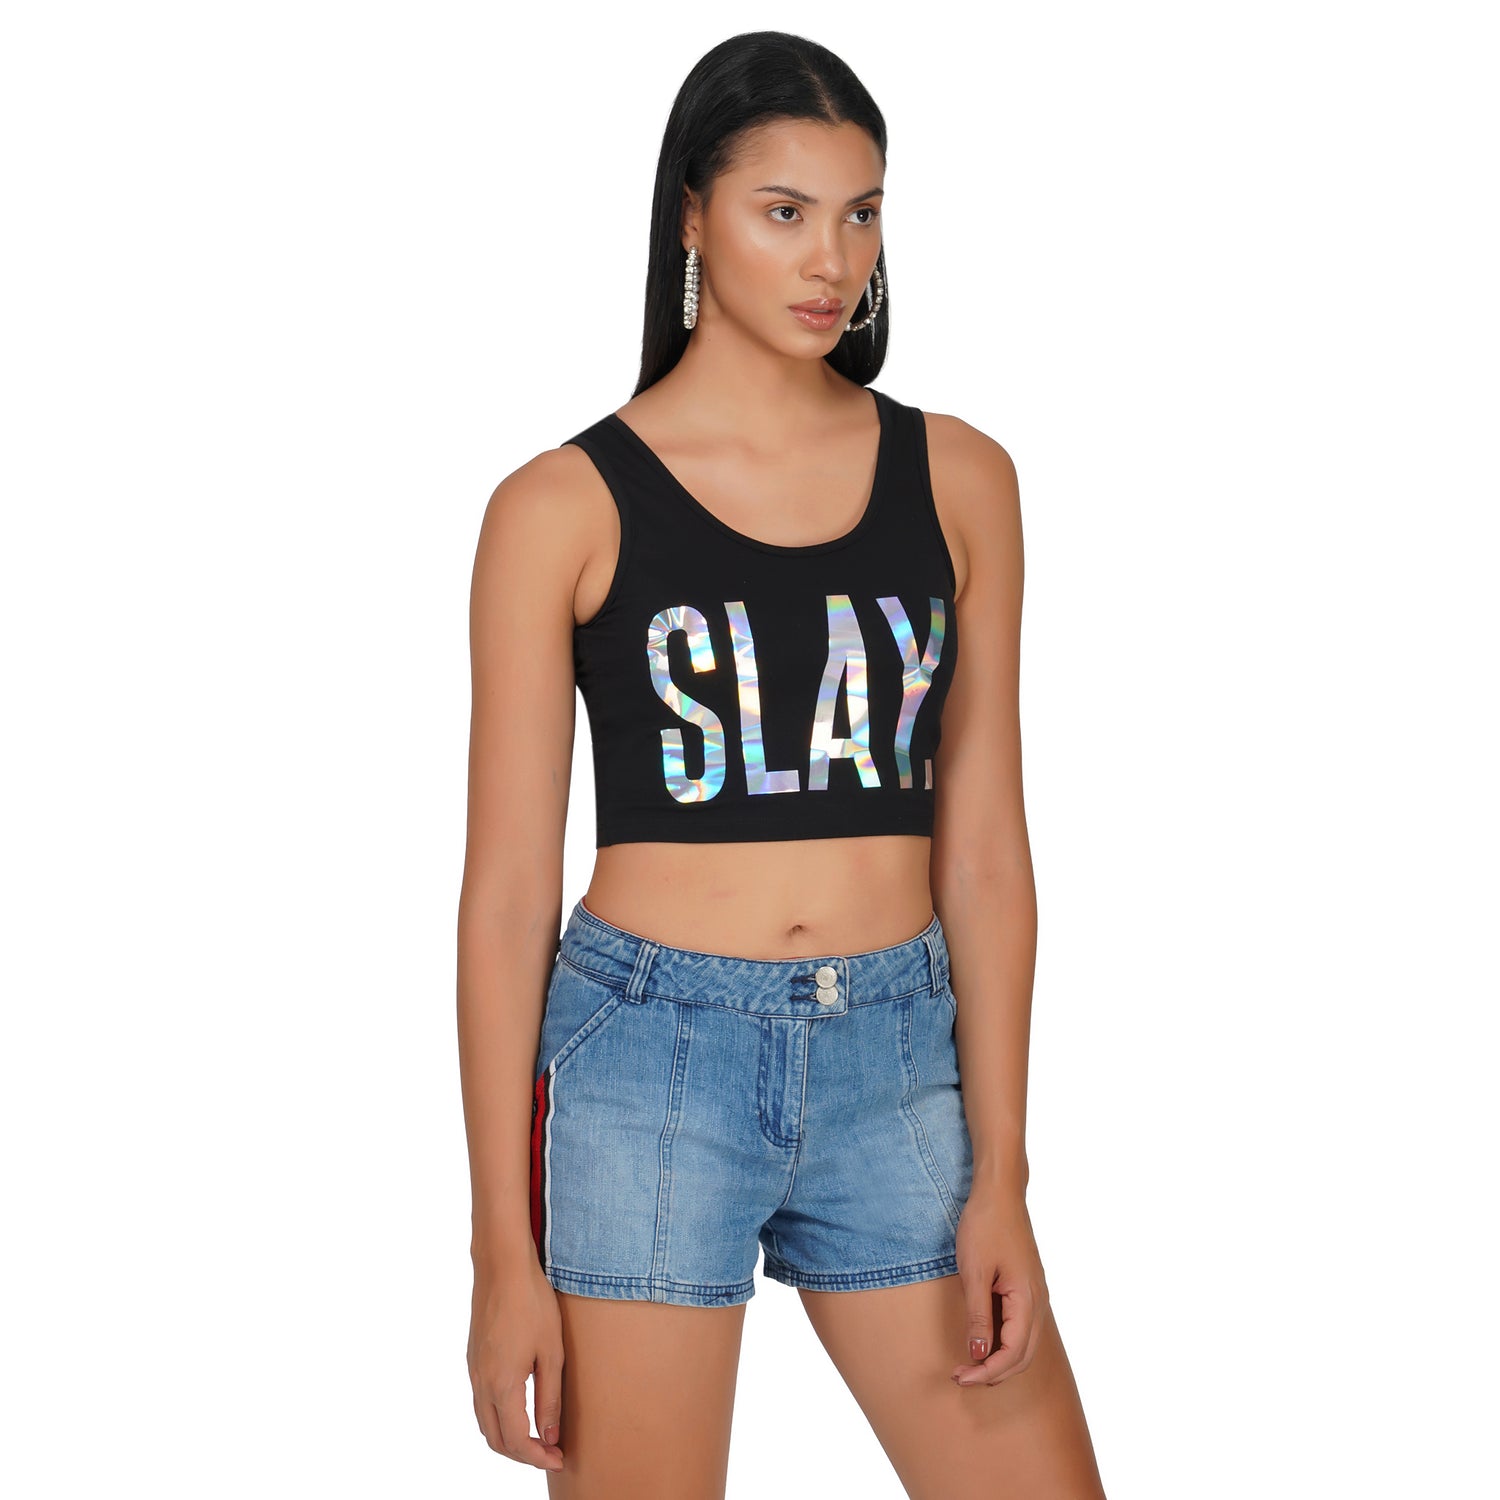 SLAY. Women's Limited Edition Holographic Reflective Foil Print Crop Top-clothing-to-slay.myshopify.com-Crop Top